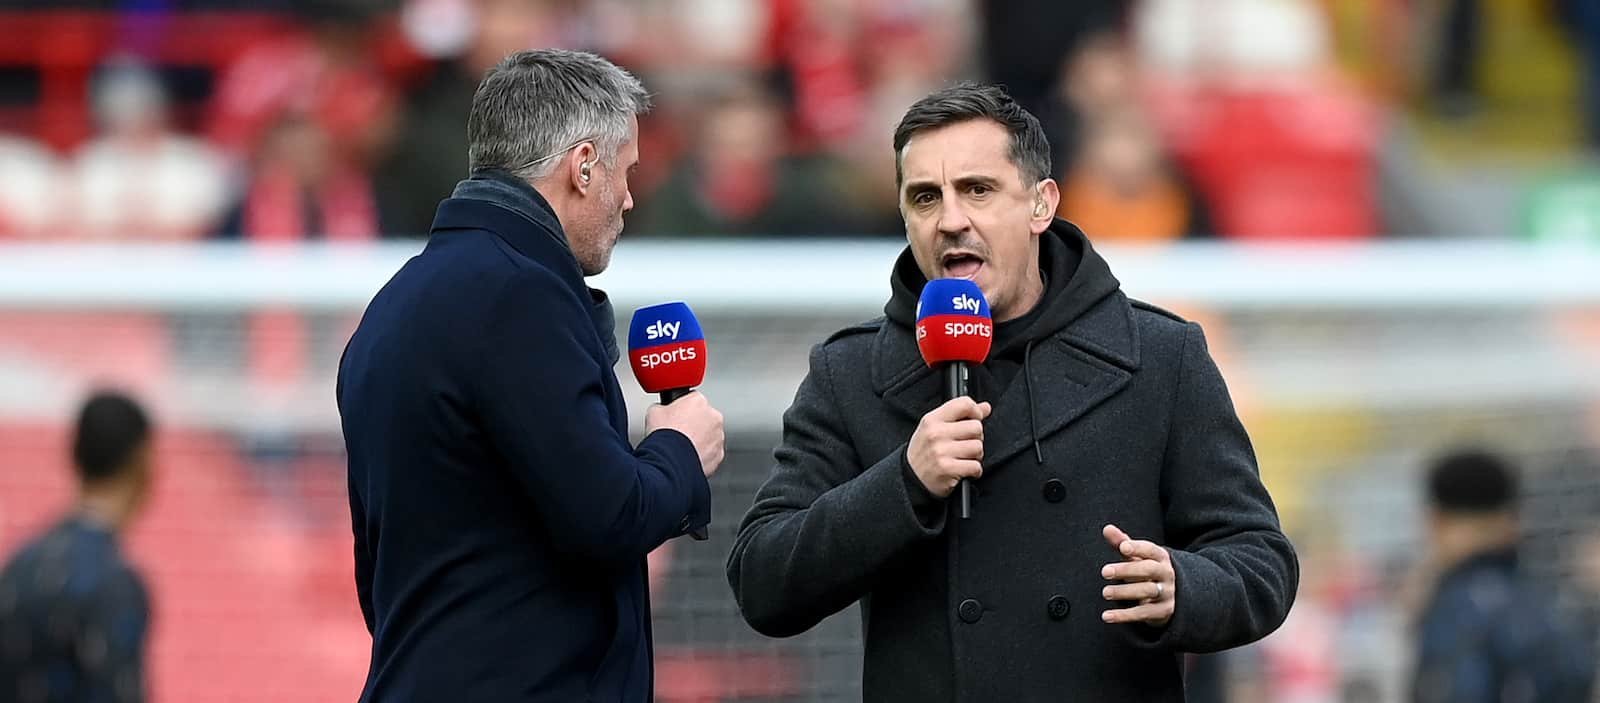 Gary Neville discusses possible managerial options for Manchester United should they sack Erik ten Hag – Man United News And Transfer News